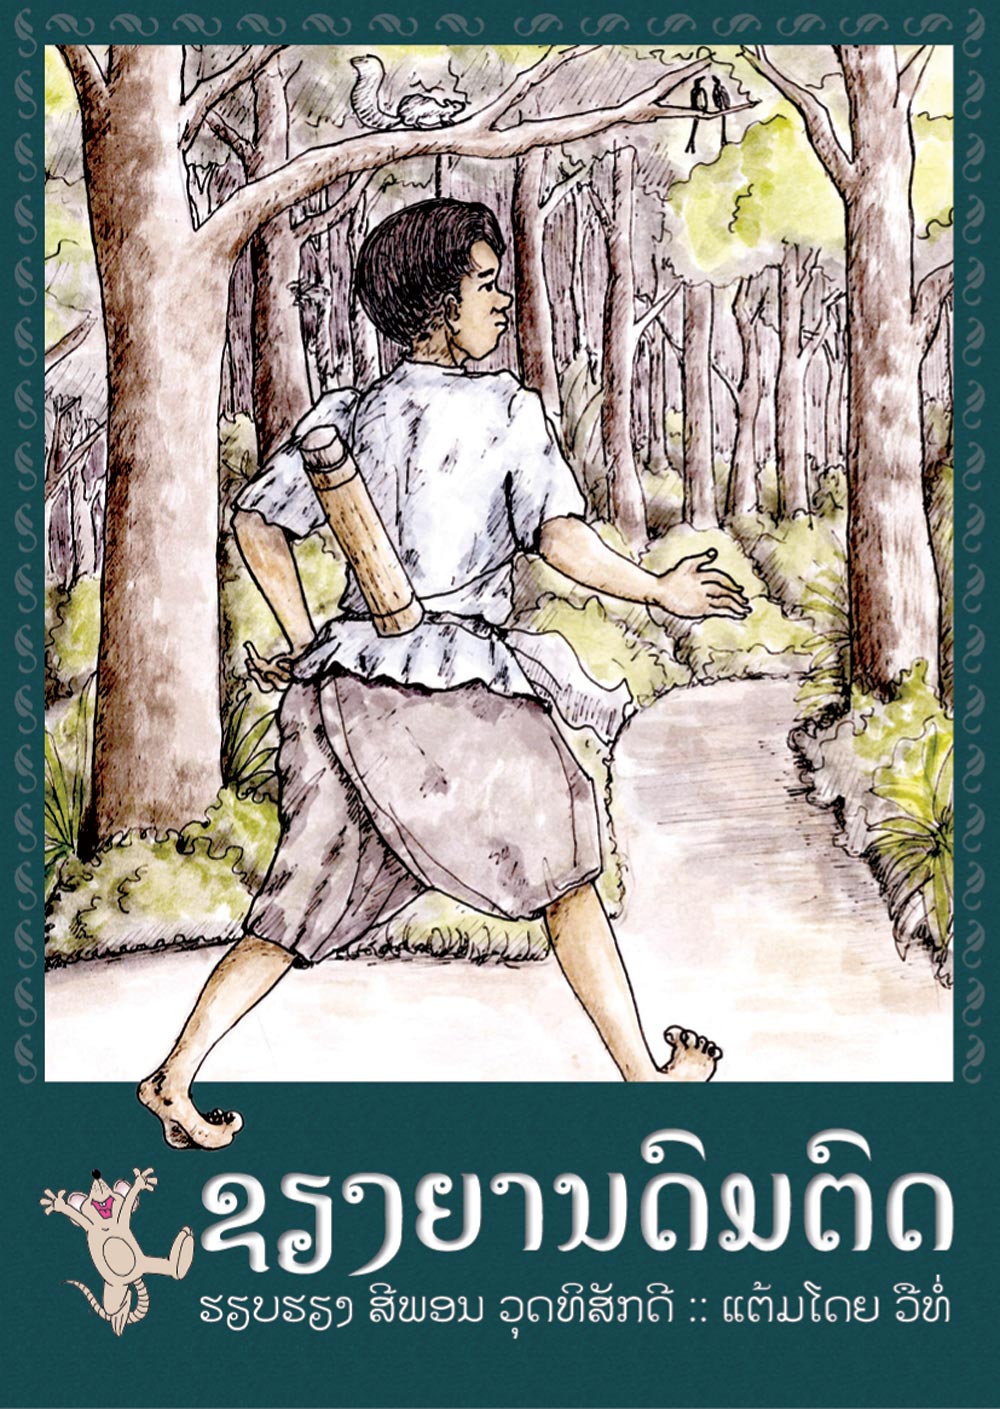 Xieng Mieng, the Trickster of Laos large book cover, published in Lao language